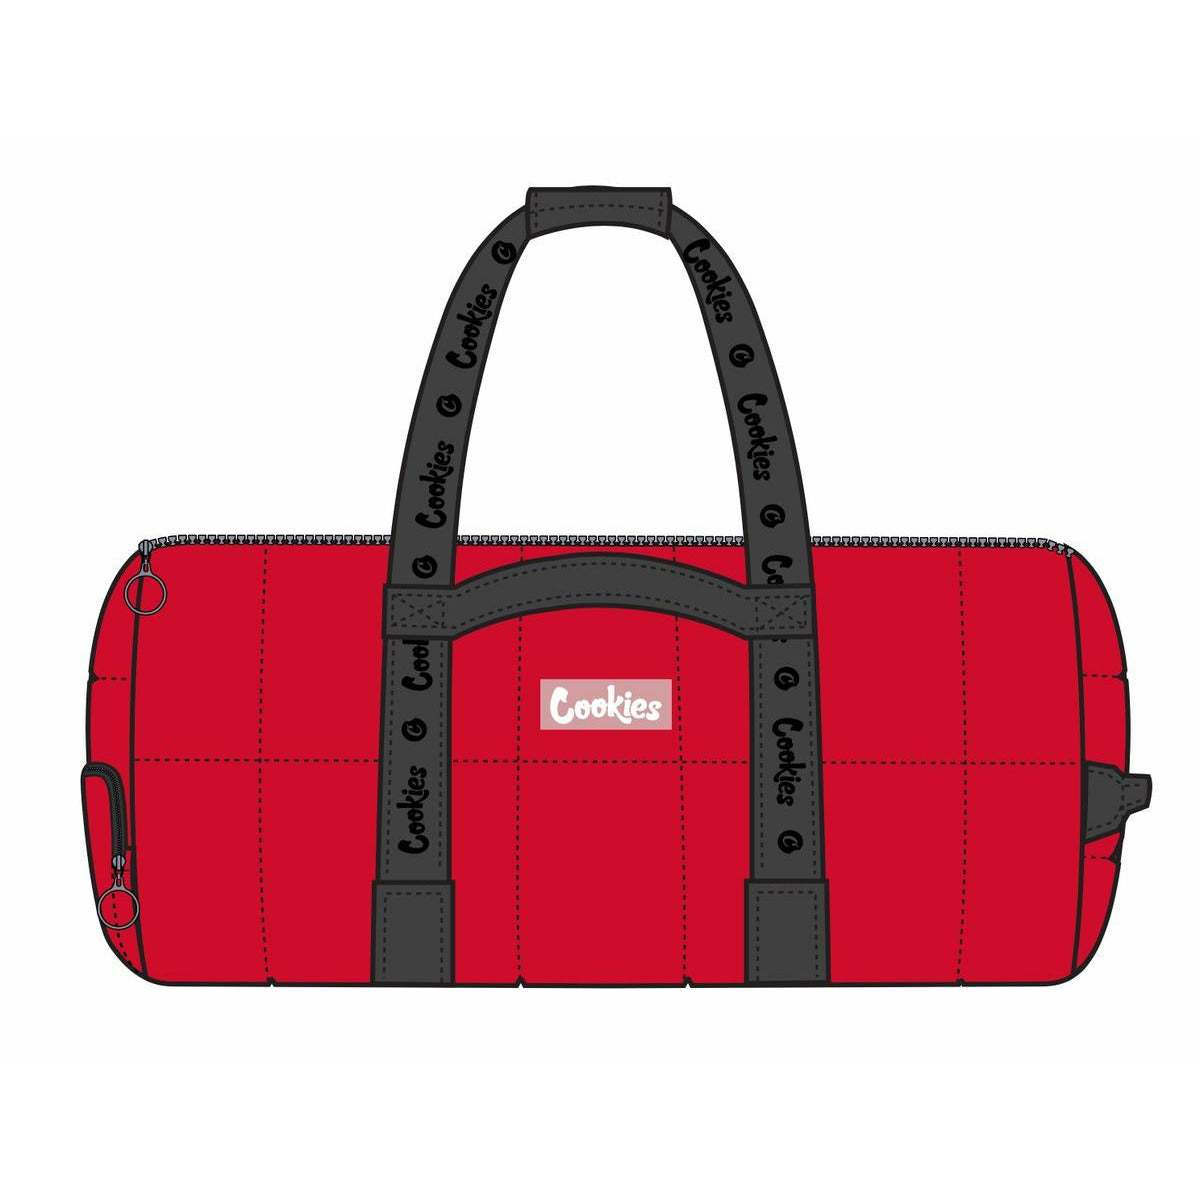 Cookies Apex Sofy "Smell Proof" Red Duffel Bag